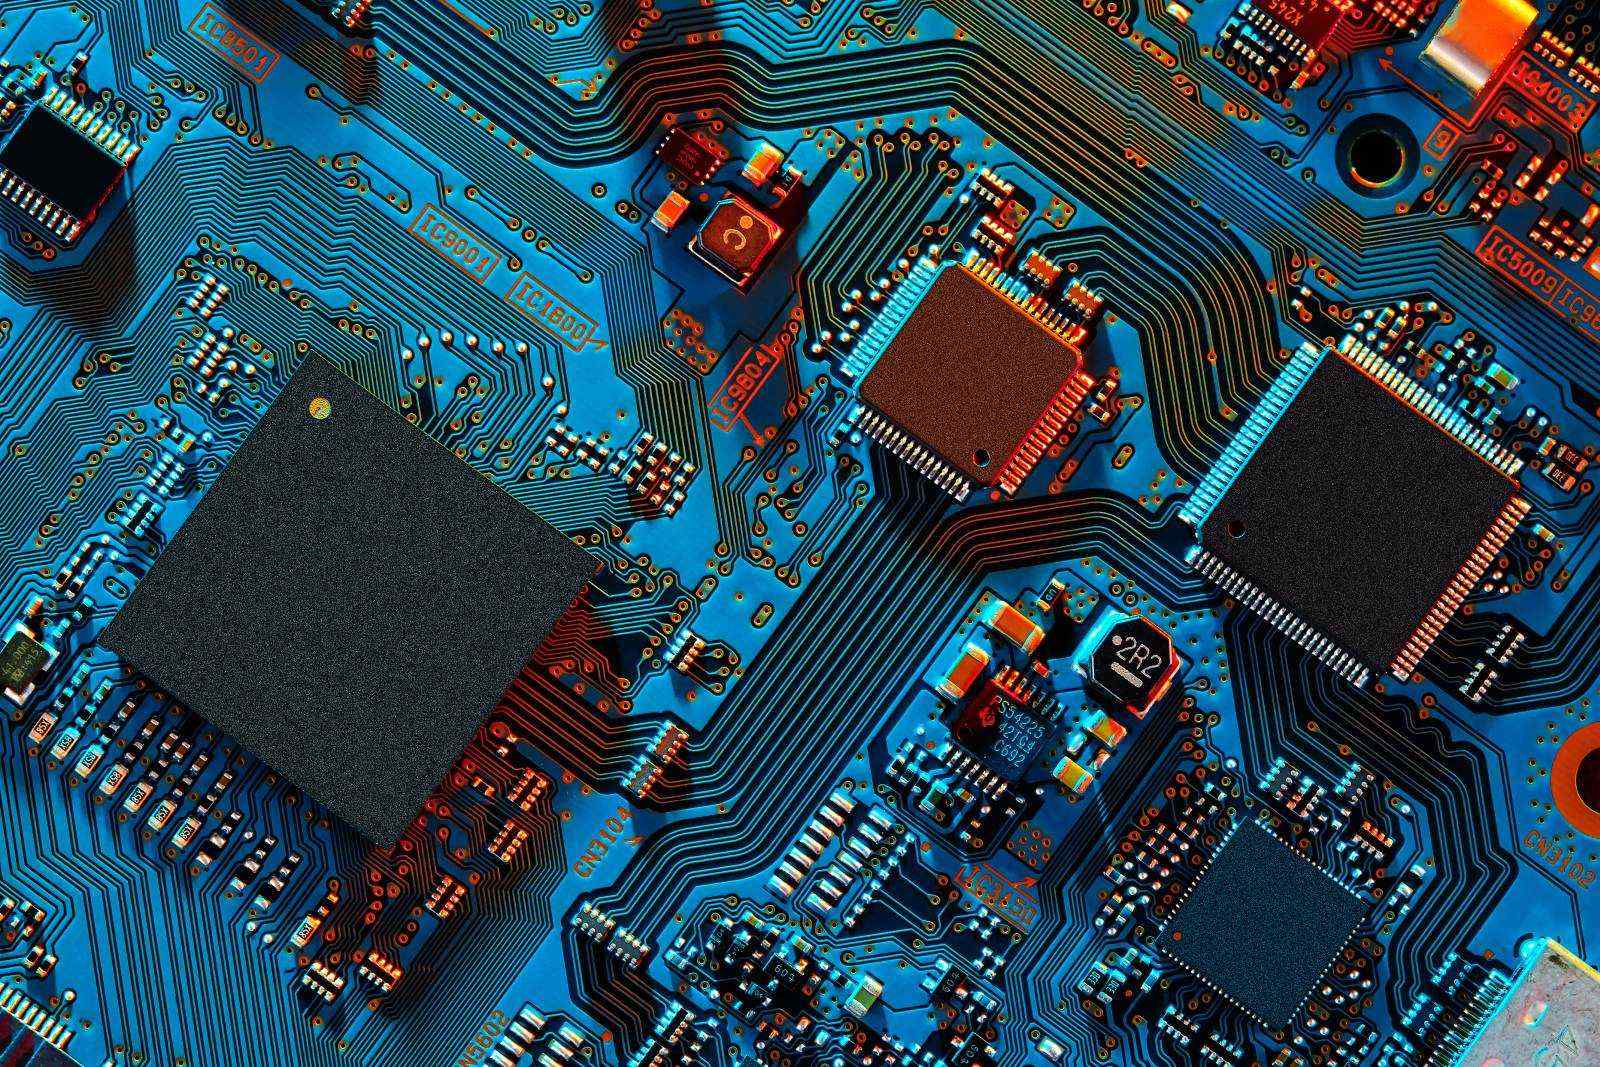 Electronic circuit board close up showing surface-mounted semiconductors and other components